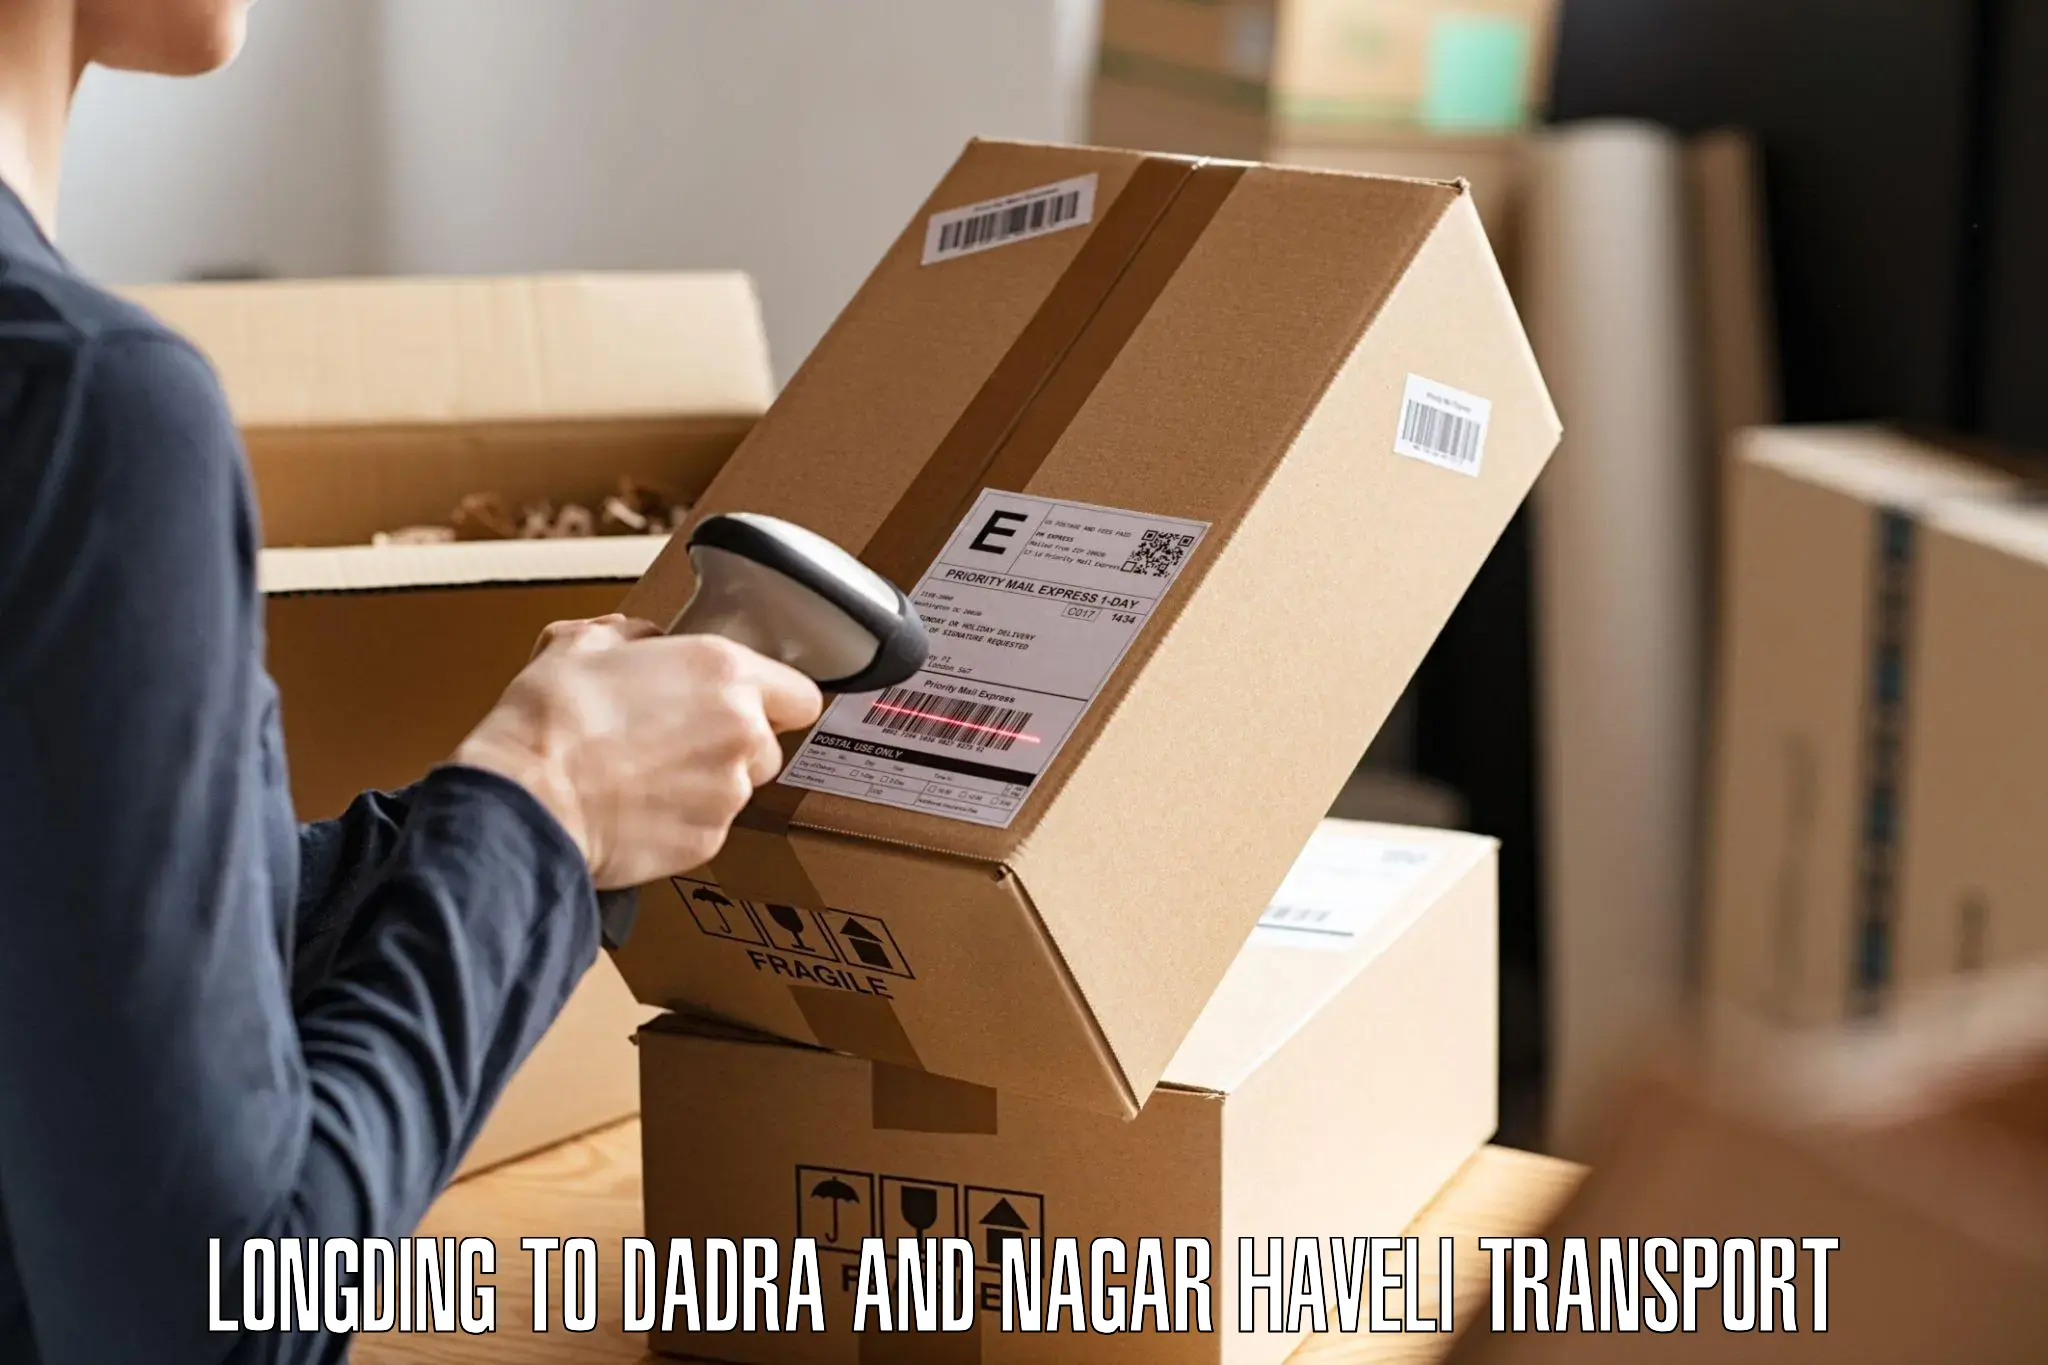 Shipping services Longding to Dadra and Nagar Haveli